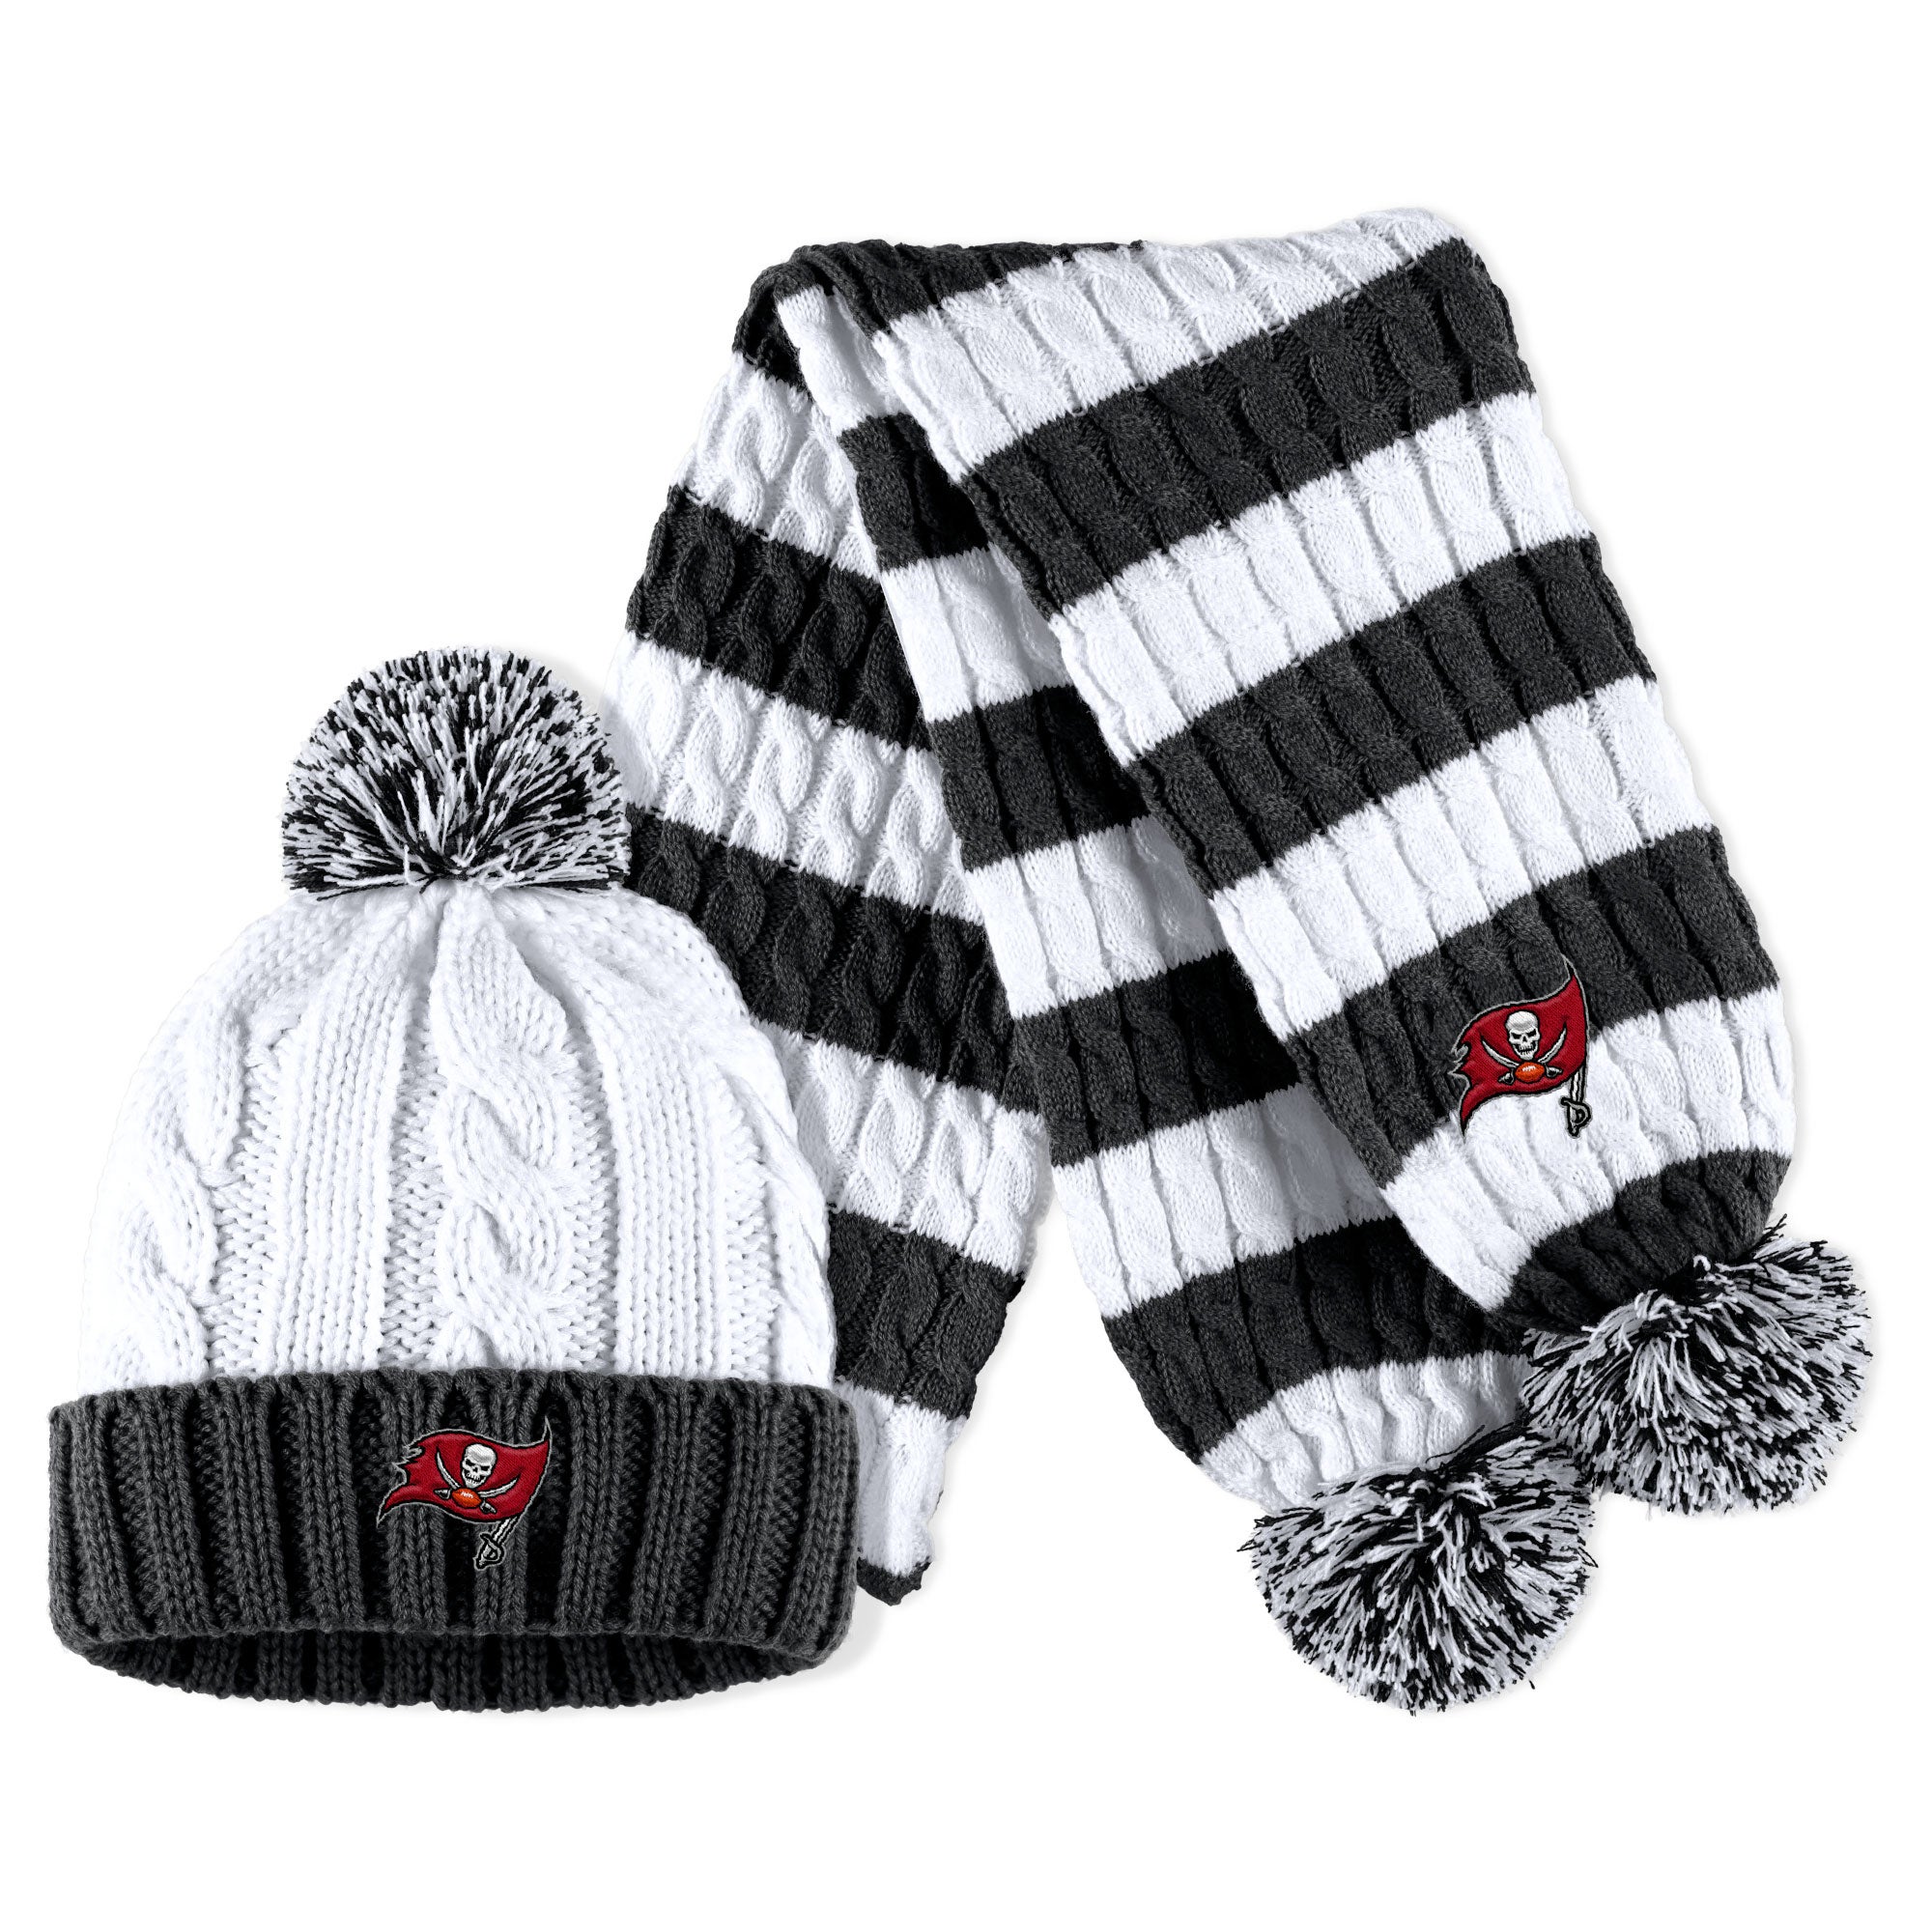 WEAR by Erin Andrews Buccaneers Cable Stripe Knit Hat & Scarf Set - Women's